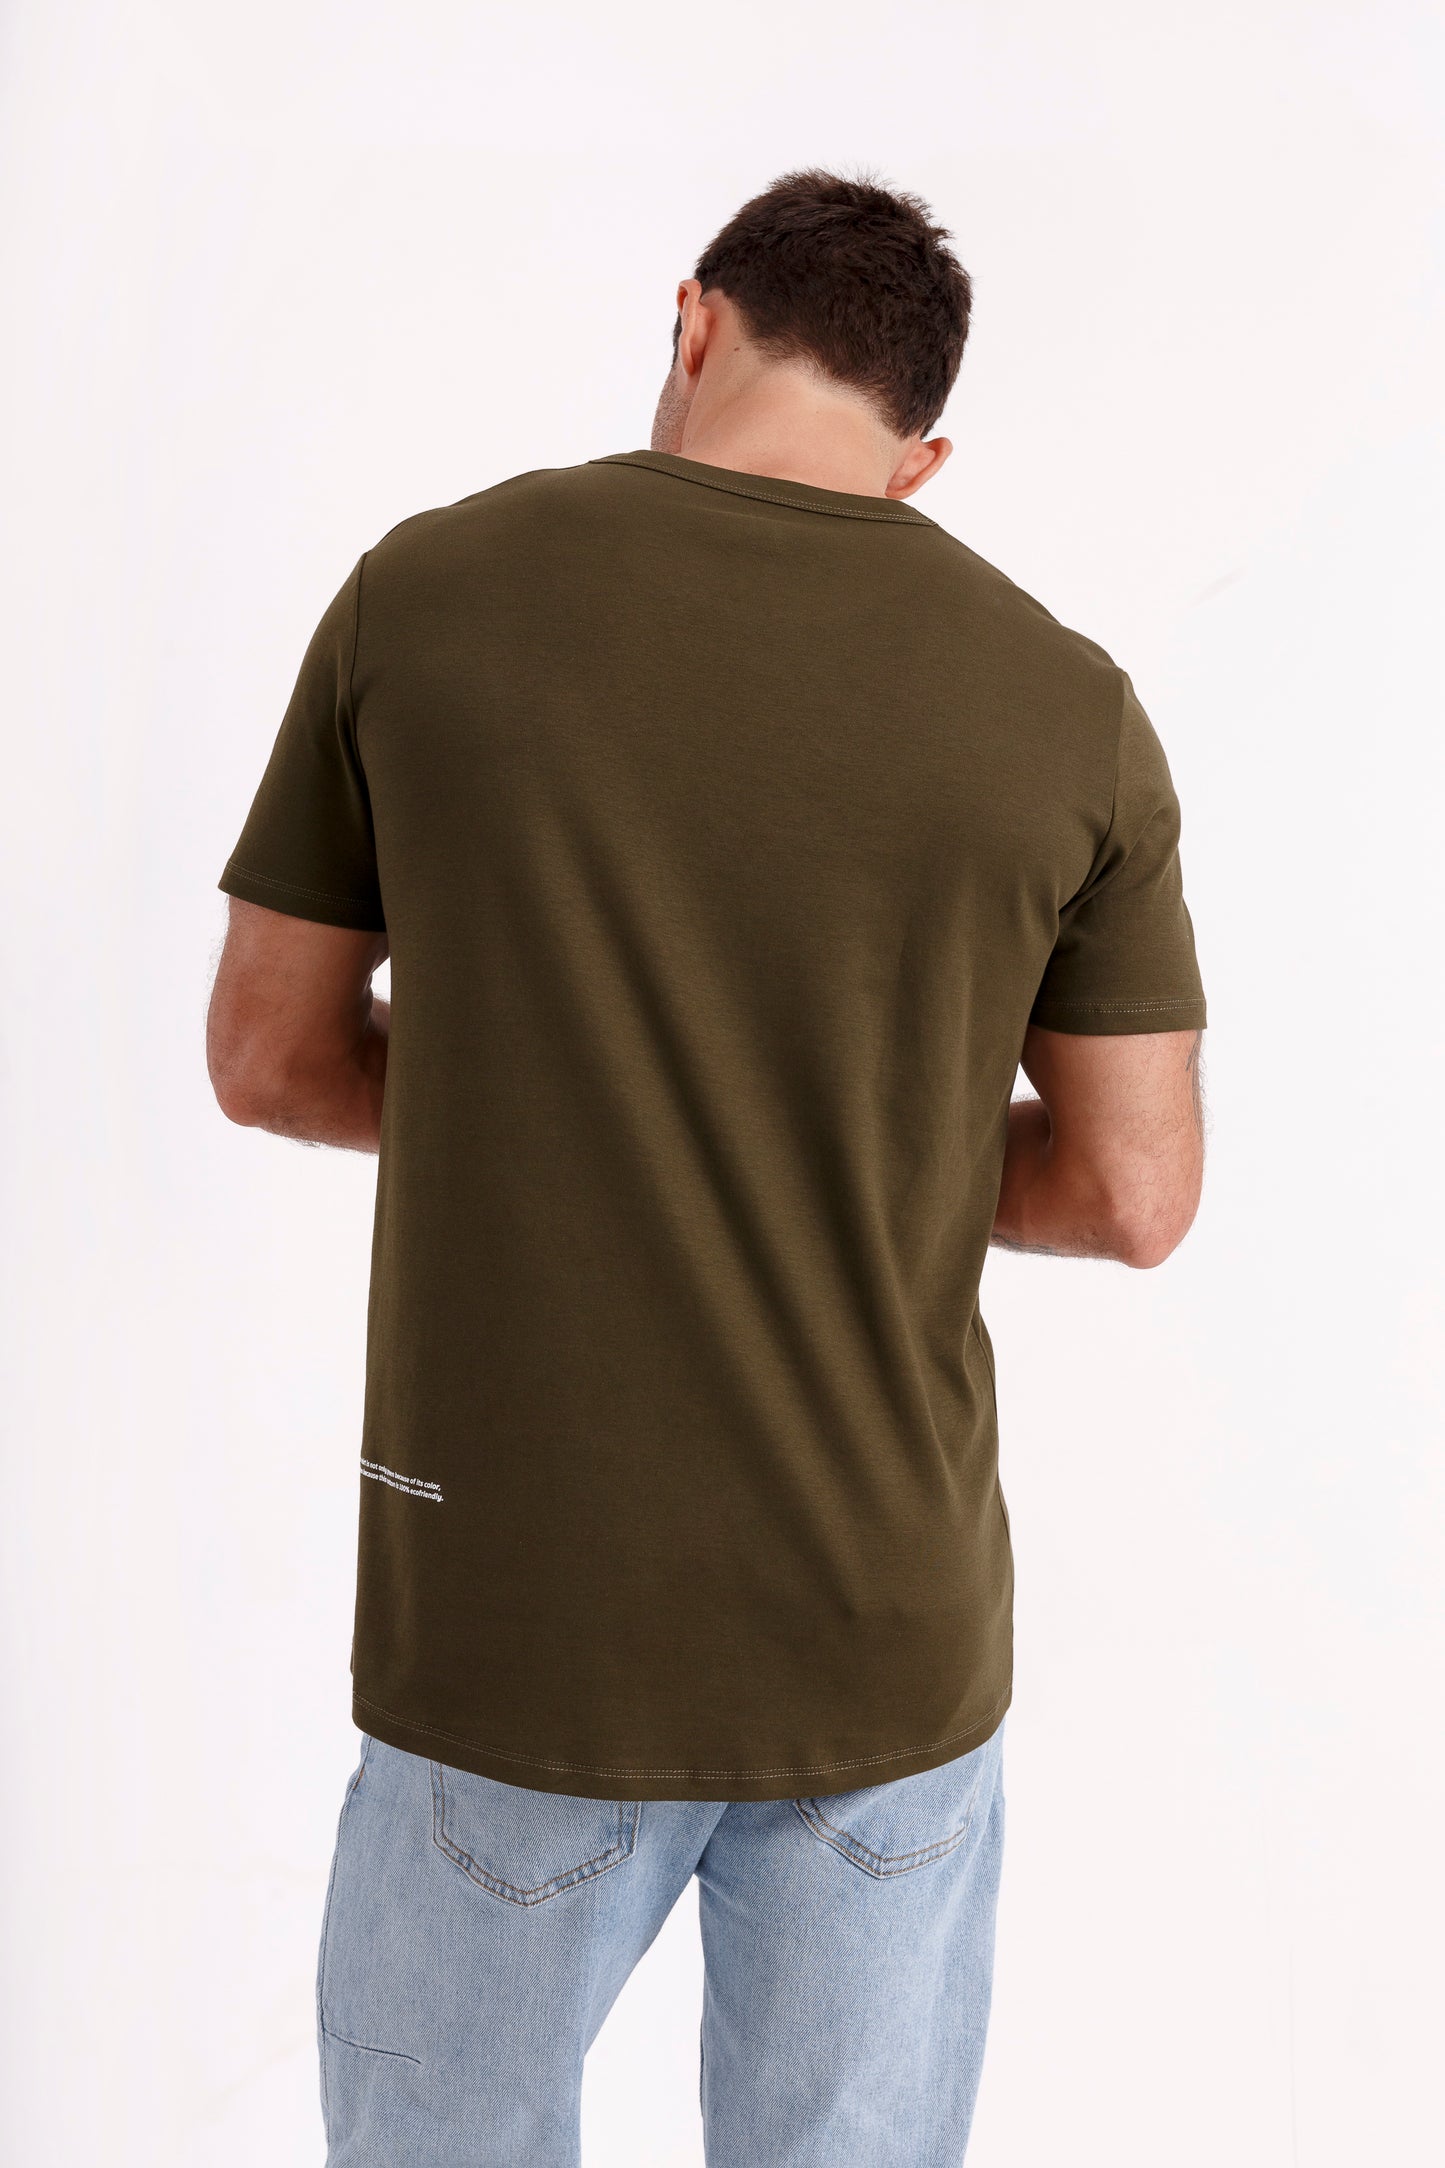 Men's "This t-shirts is green because it's ecofriendly"